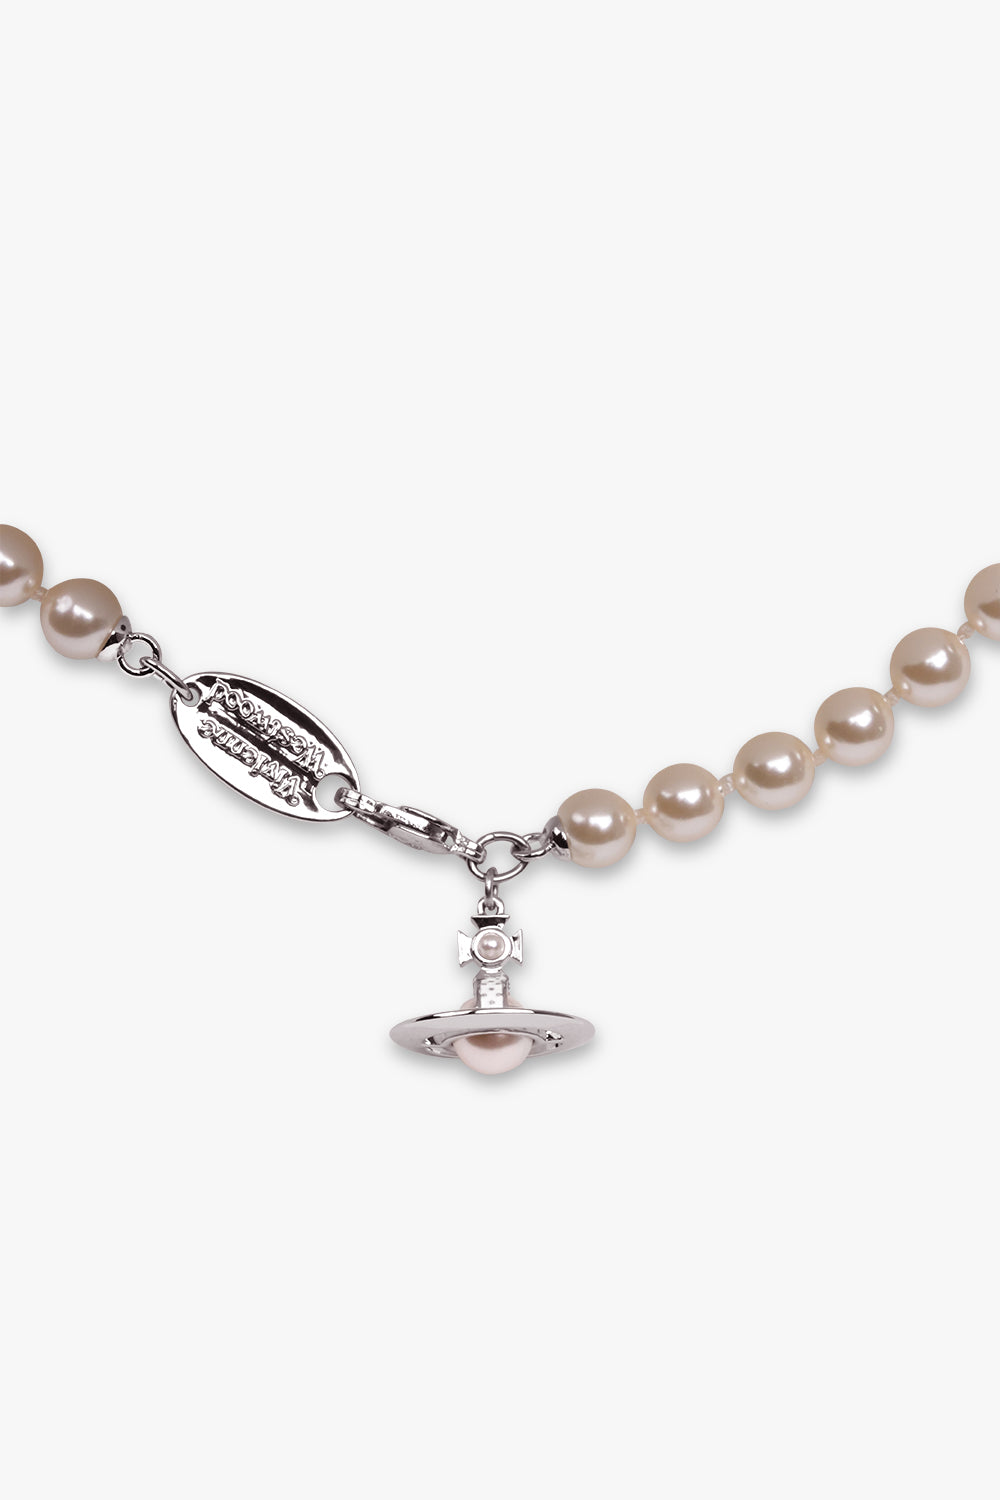 VIVIENNE WESTWOOD JEWELLRY SILVER / SILVER SIMONETTA PEARL NECKLACE | CREAM ROSE PEARL/WHITE